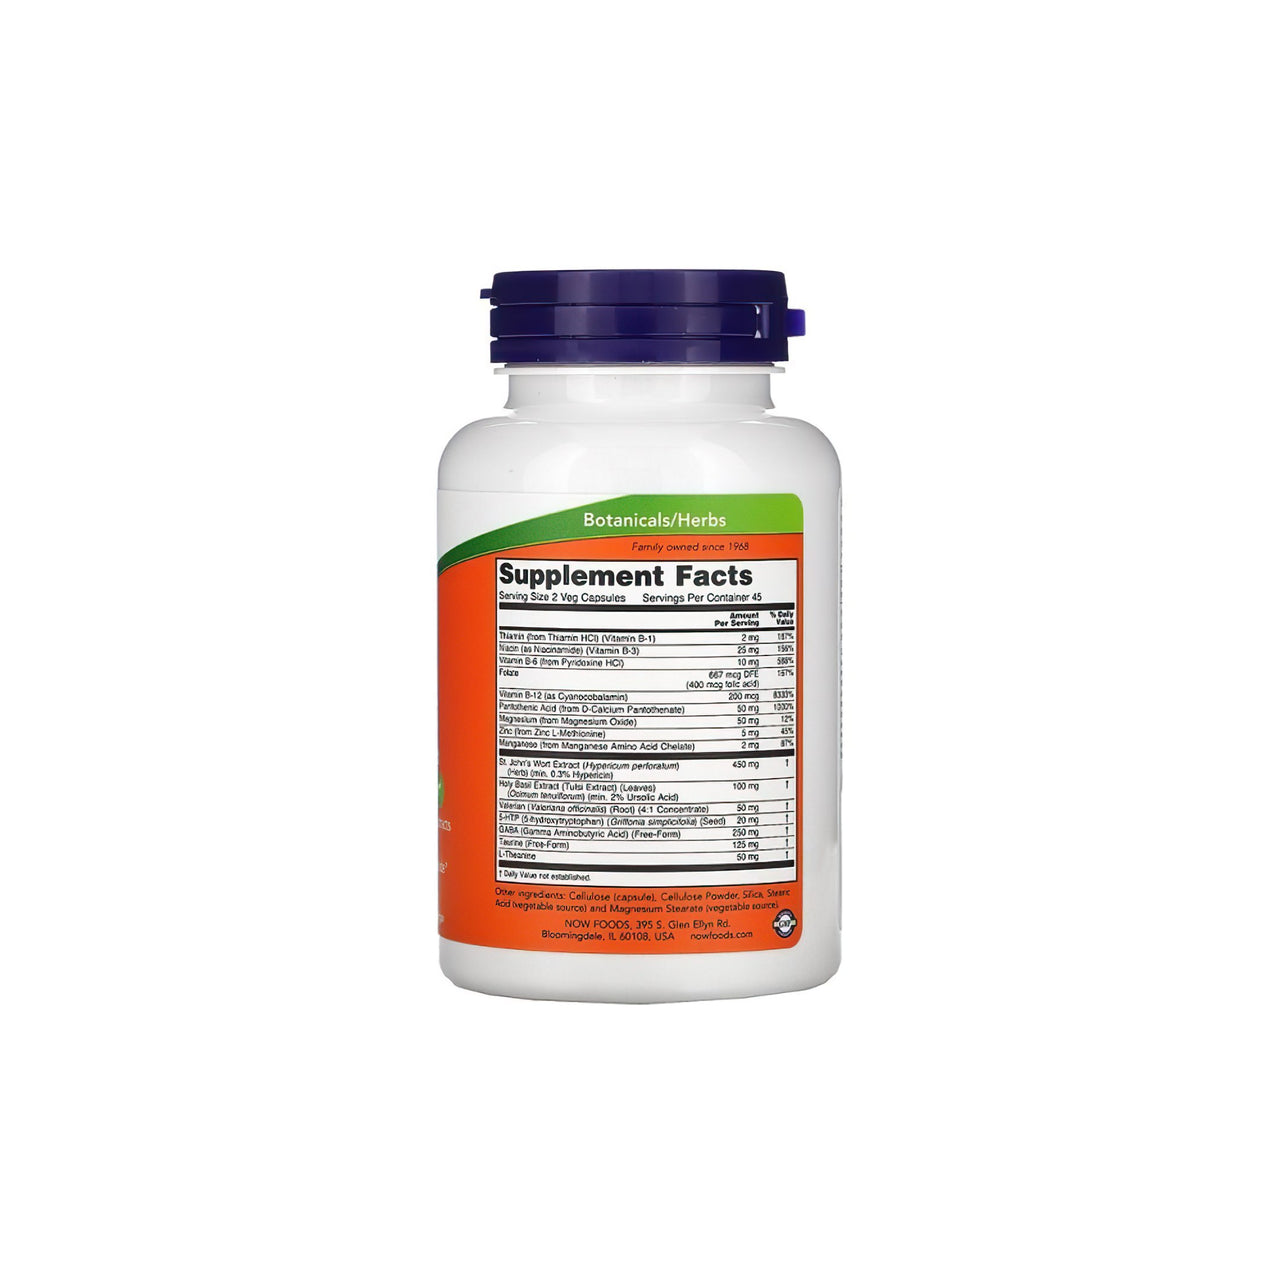 A bottle of Now Foods Mood Support 90 vege capsules on a white background, promoting a balanced mood and positive attitude.